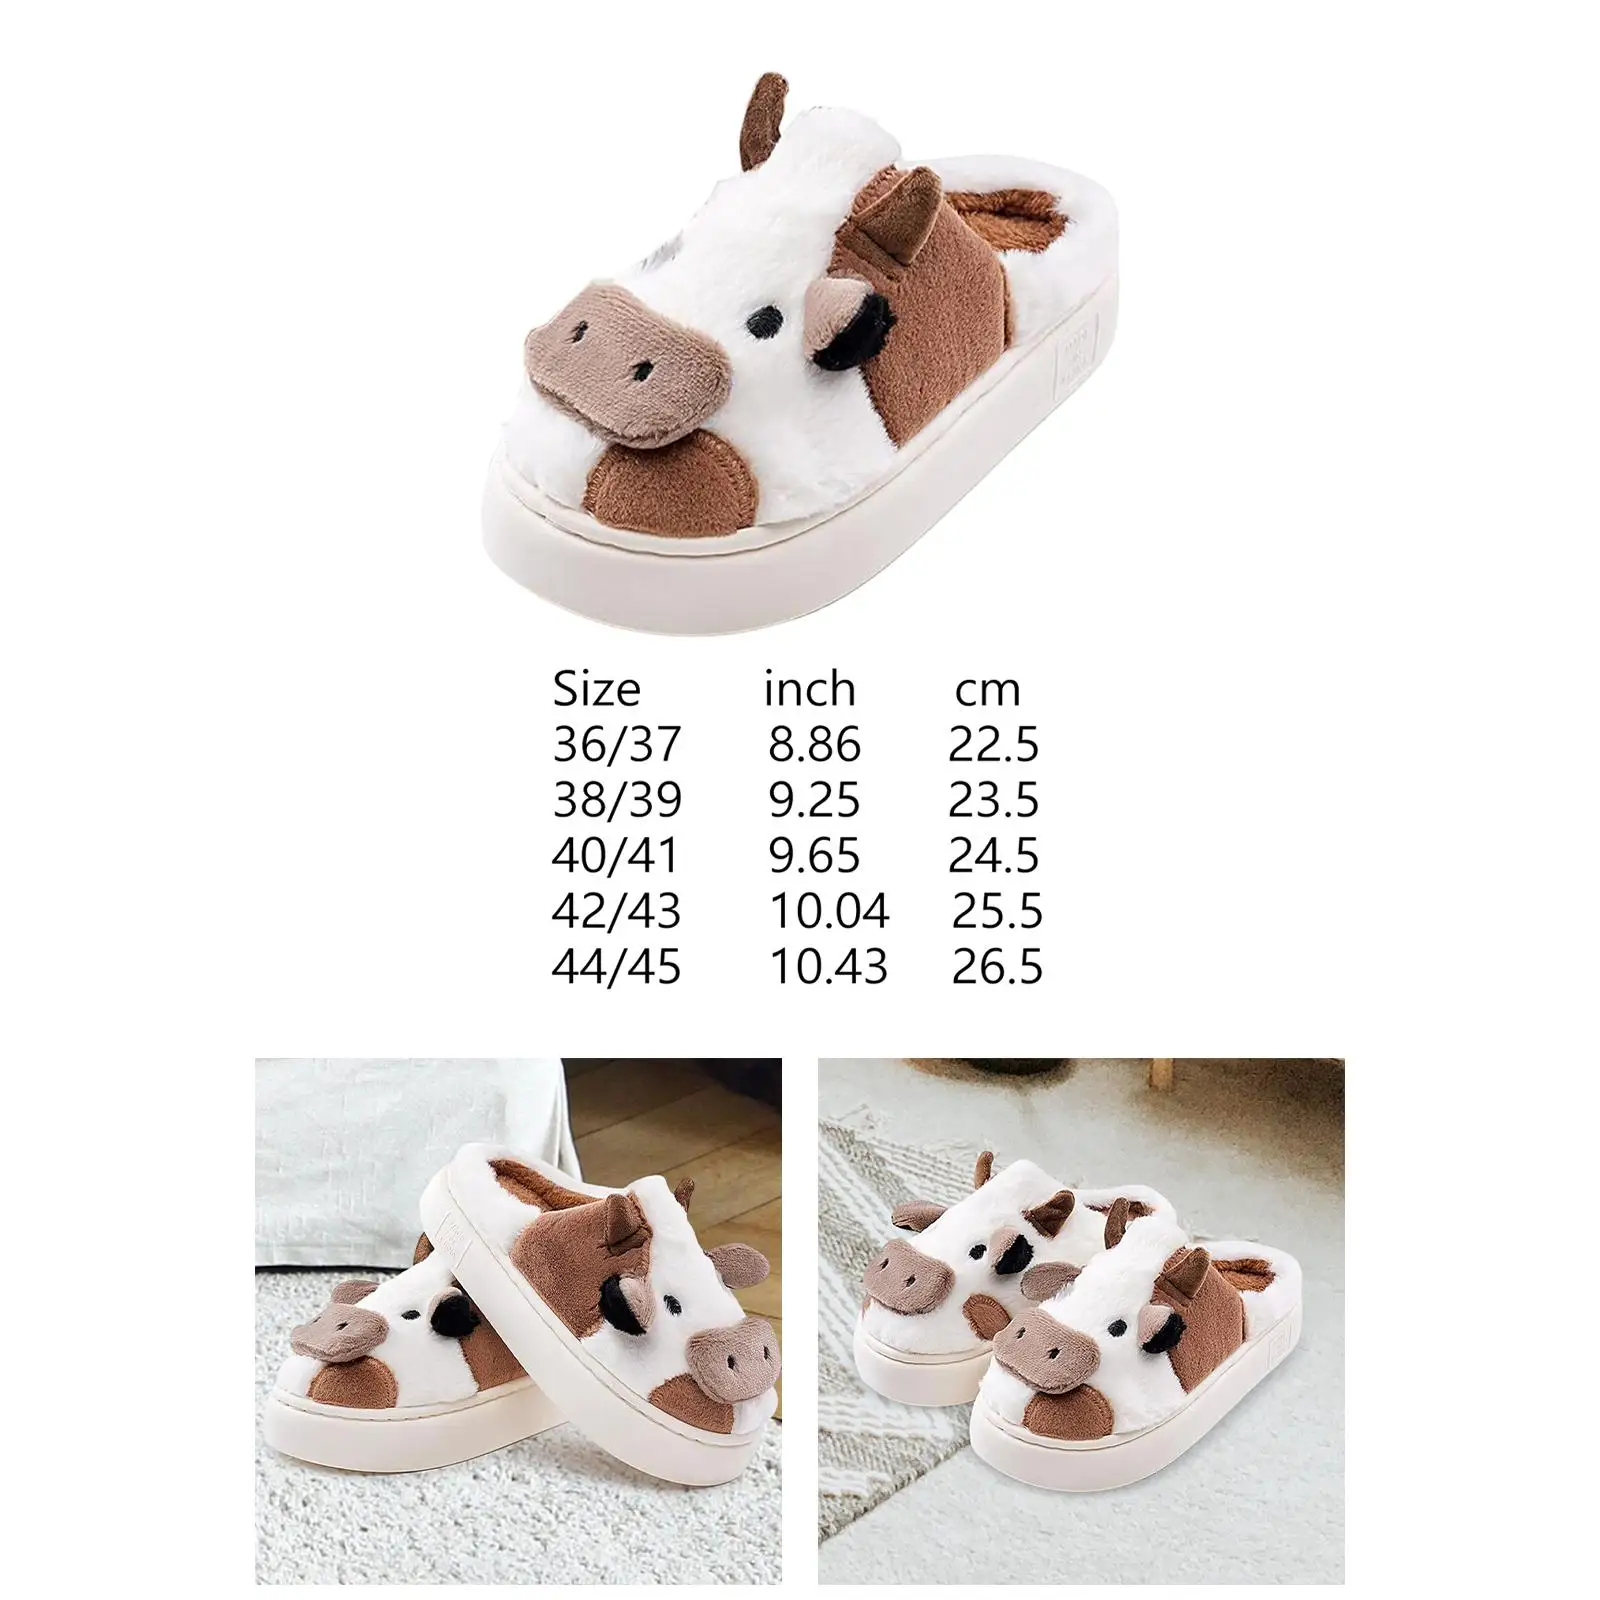 Winter Cow Plush Slippers Adorable Lightweight Warm Novelty Birthday Gift Animal Home Shoes for Dorm Apartment House Travel Men